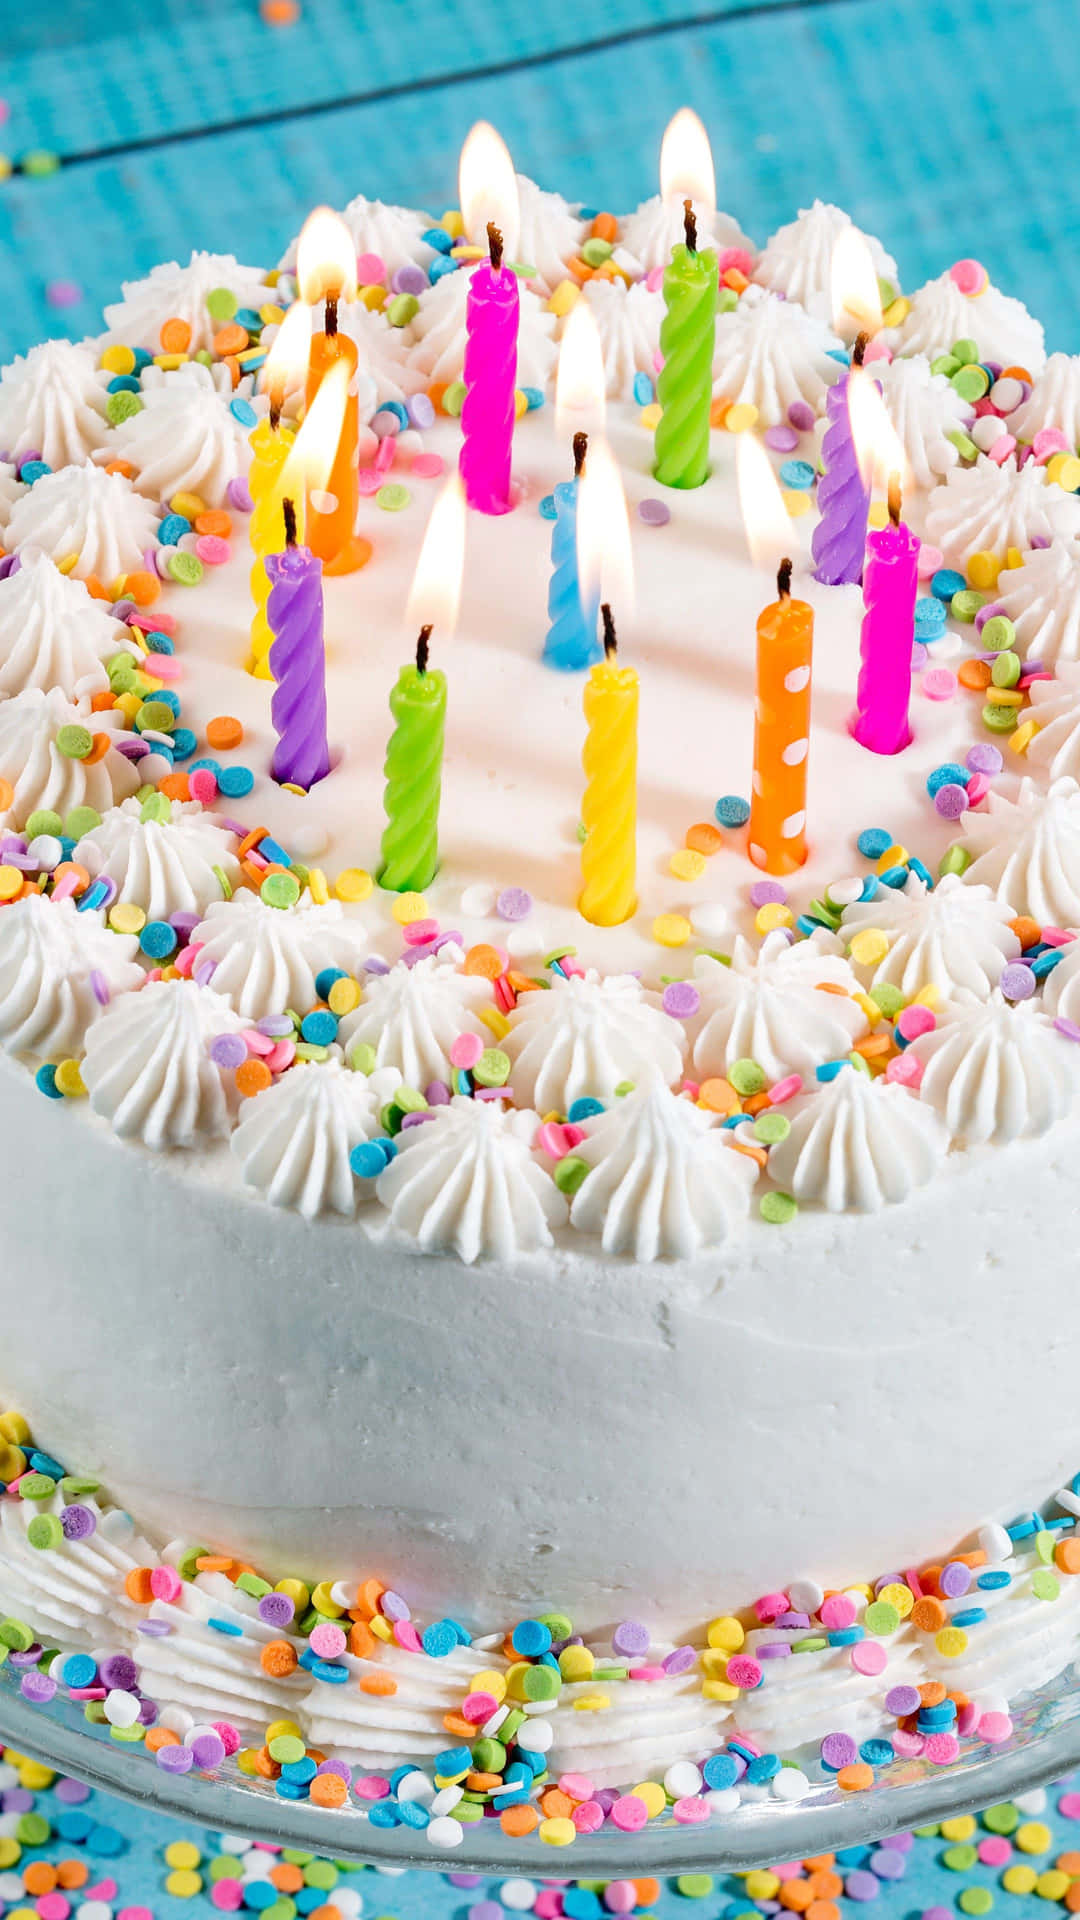 Celebrate special occasions with a delicious birthday cake!